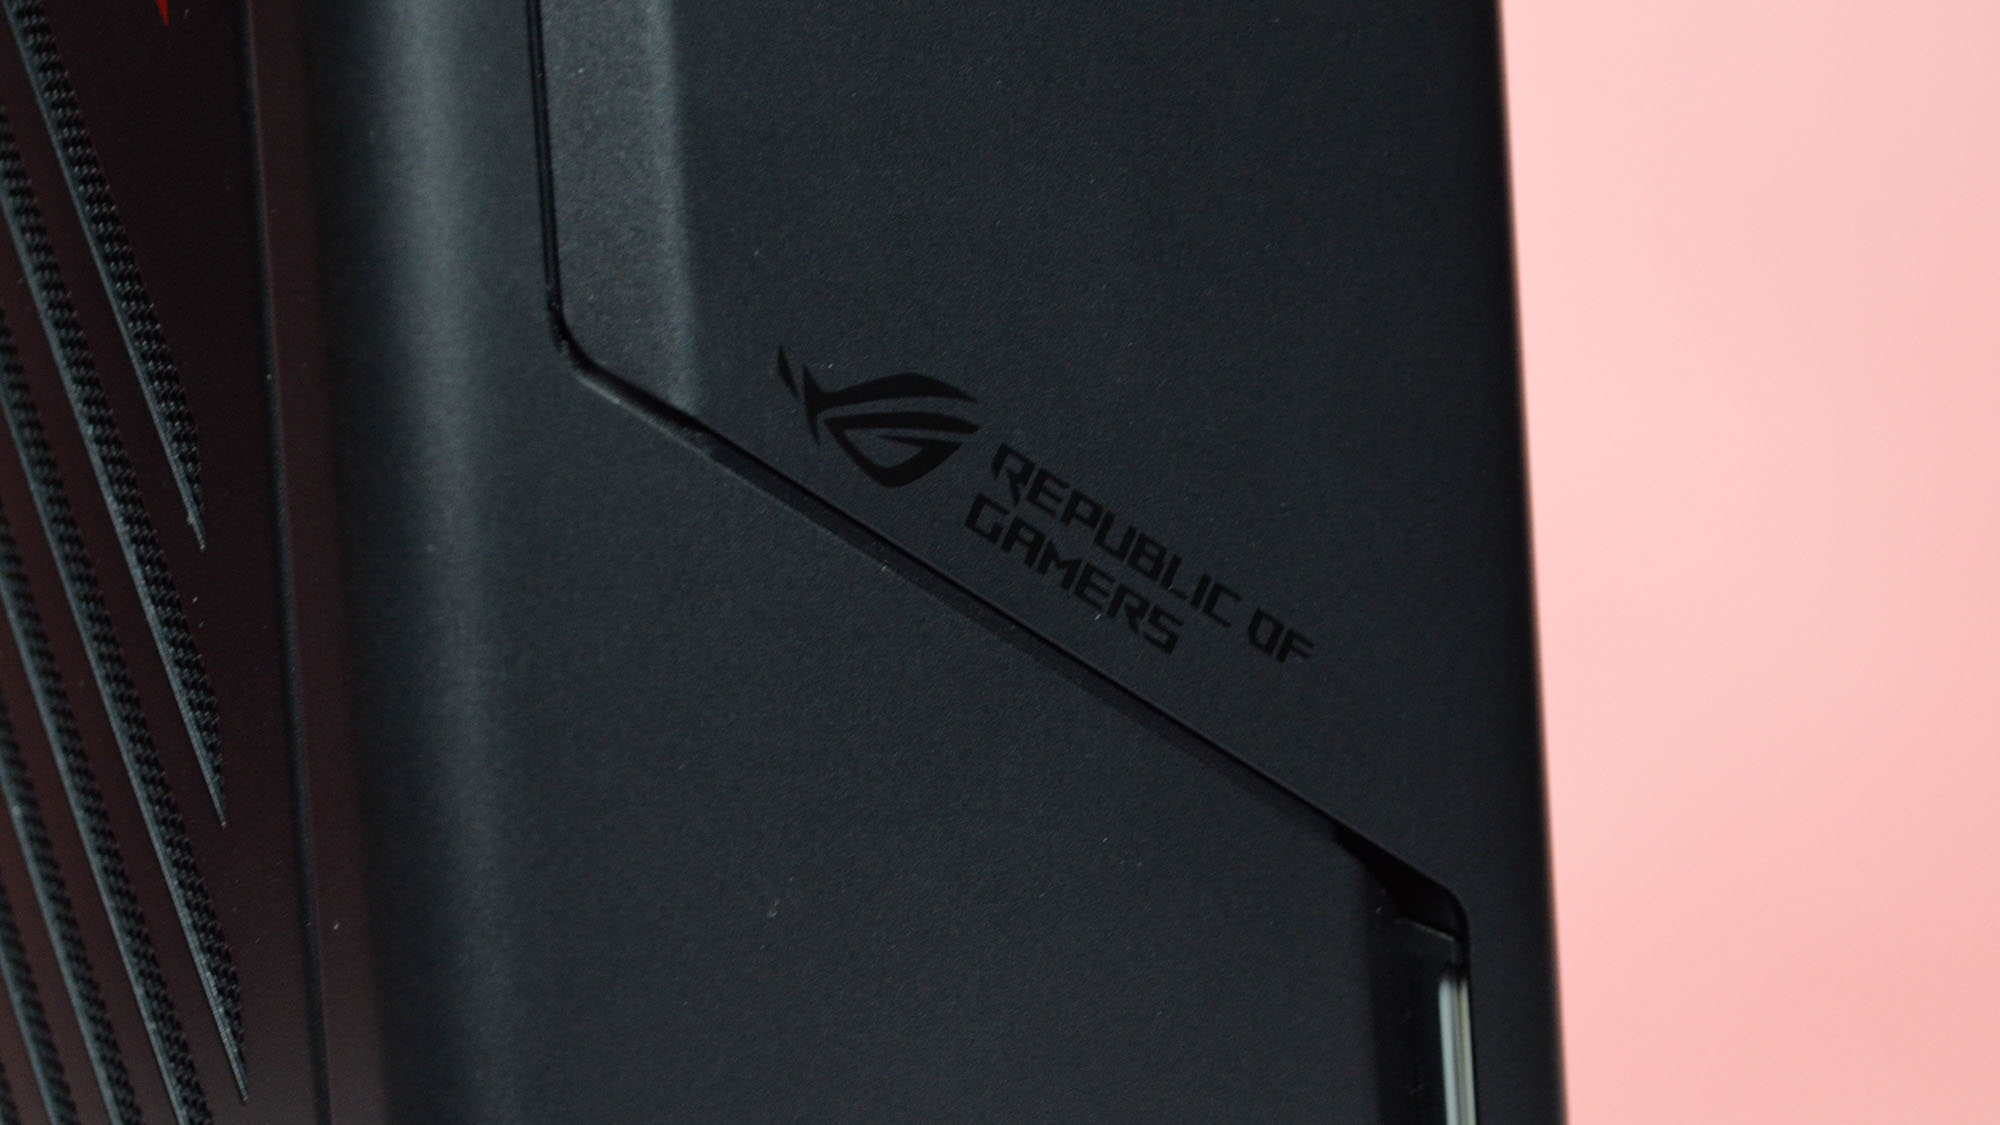 An Asus ROG G22CH on a desk